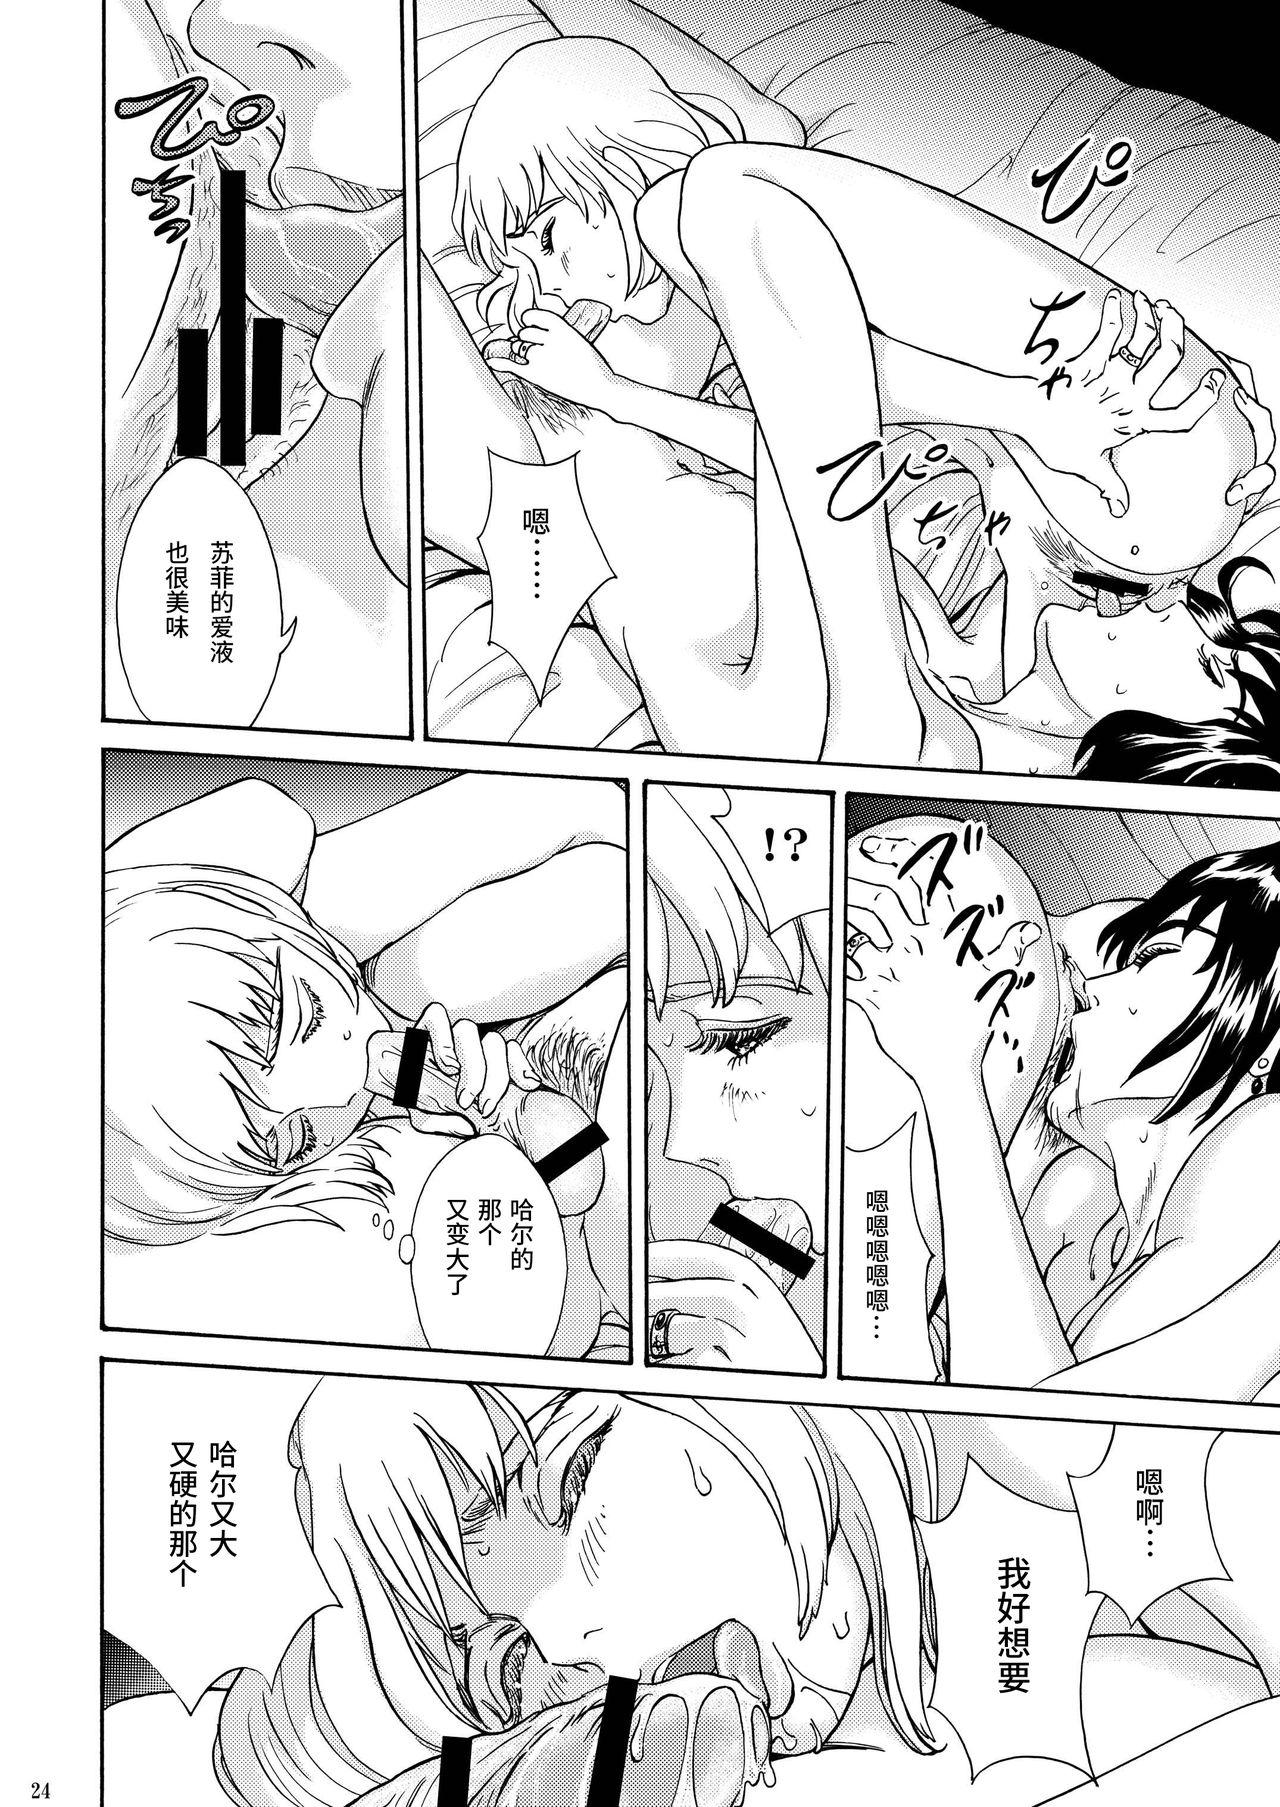 Online Futari no Shiro - Howls moving castle Licking - Page 9